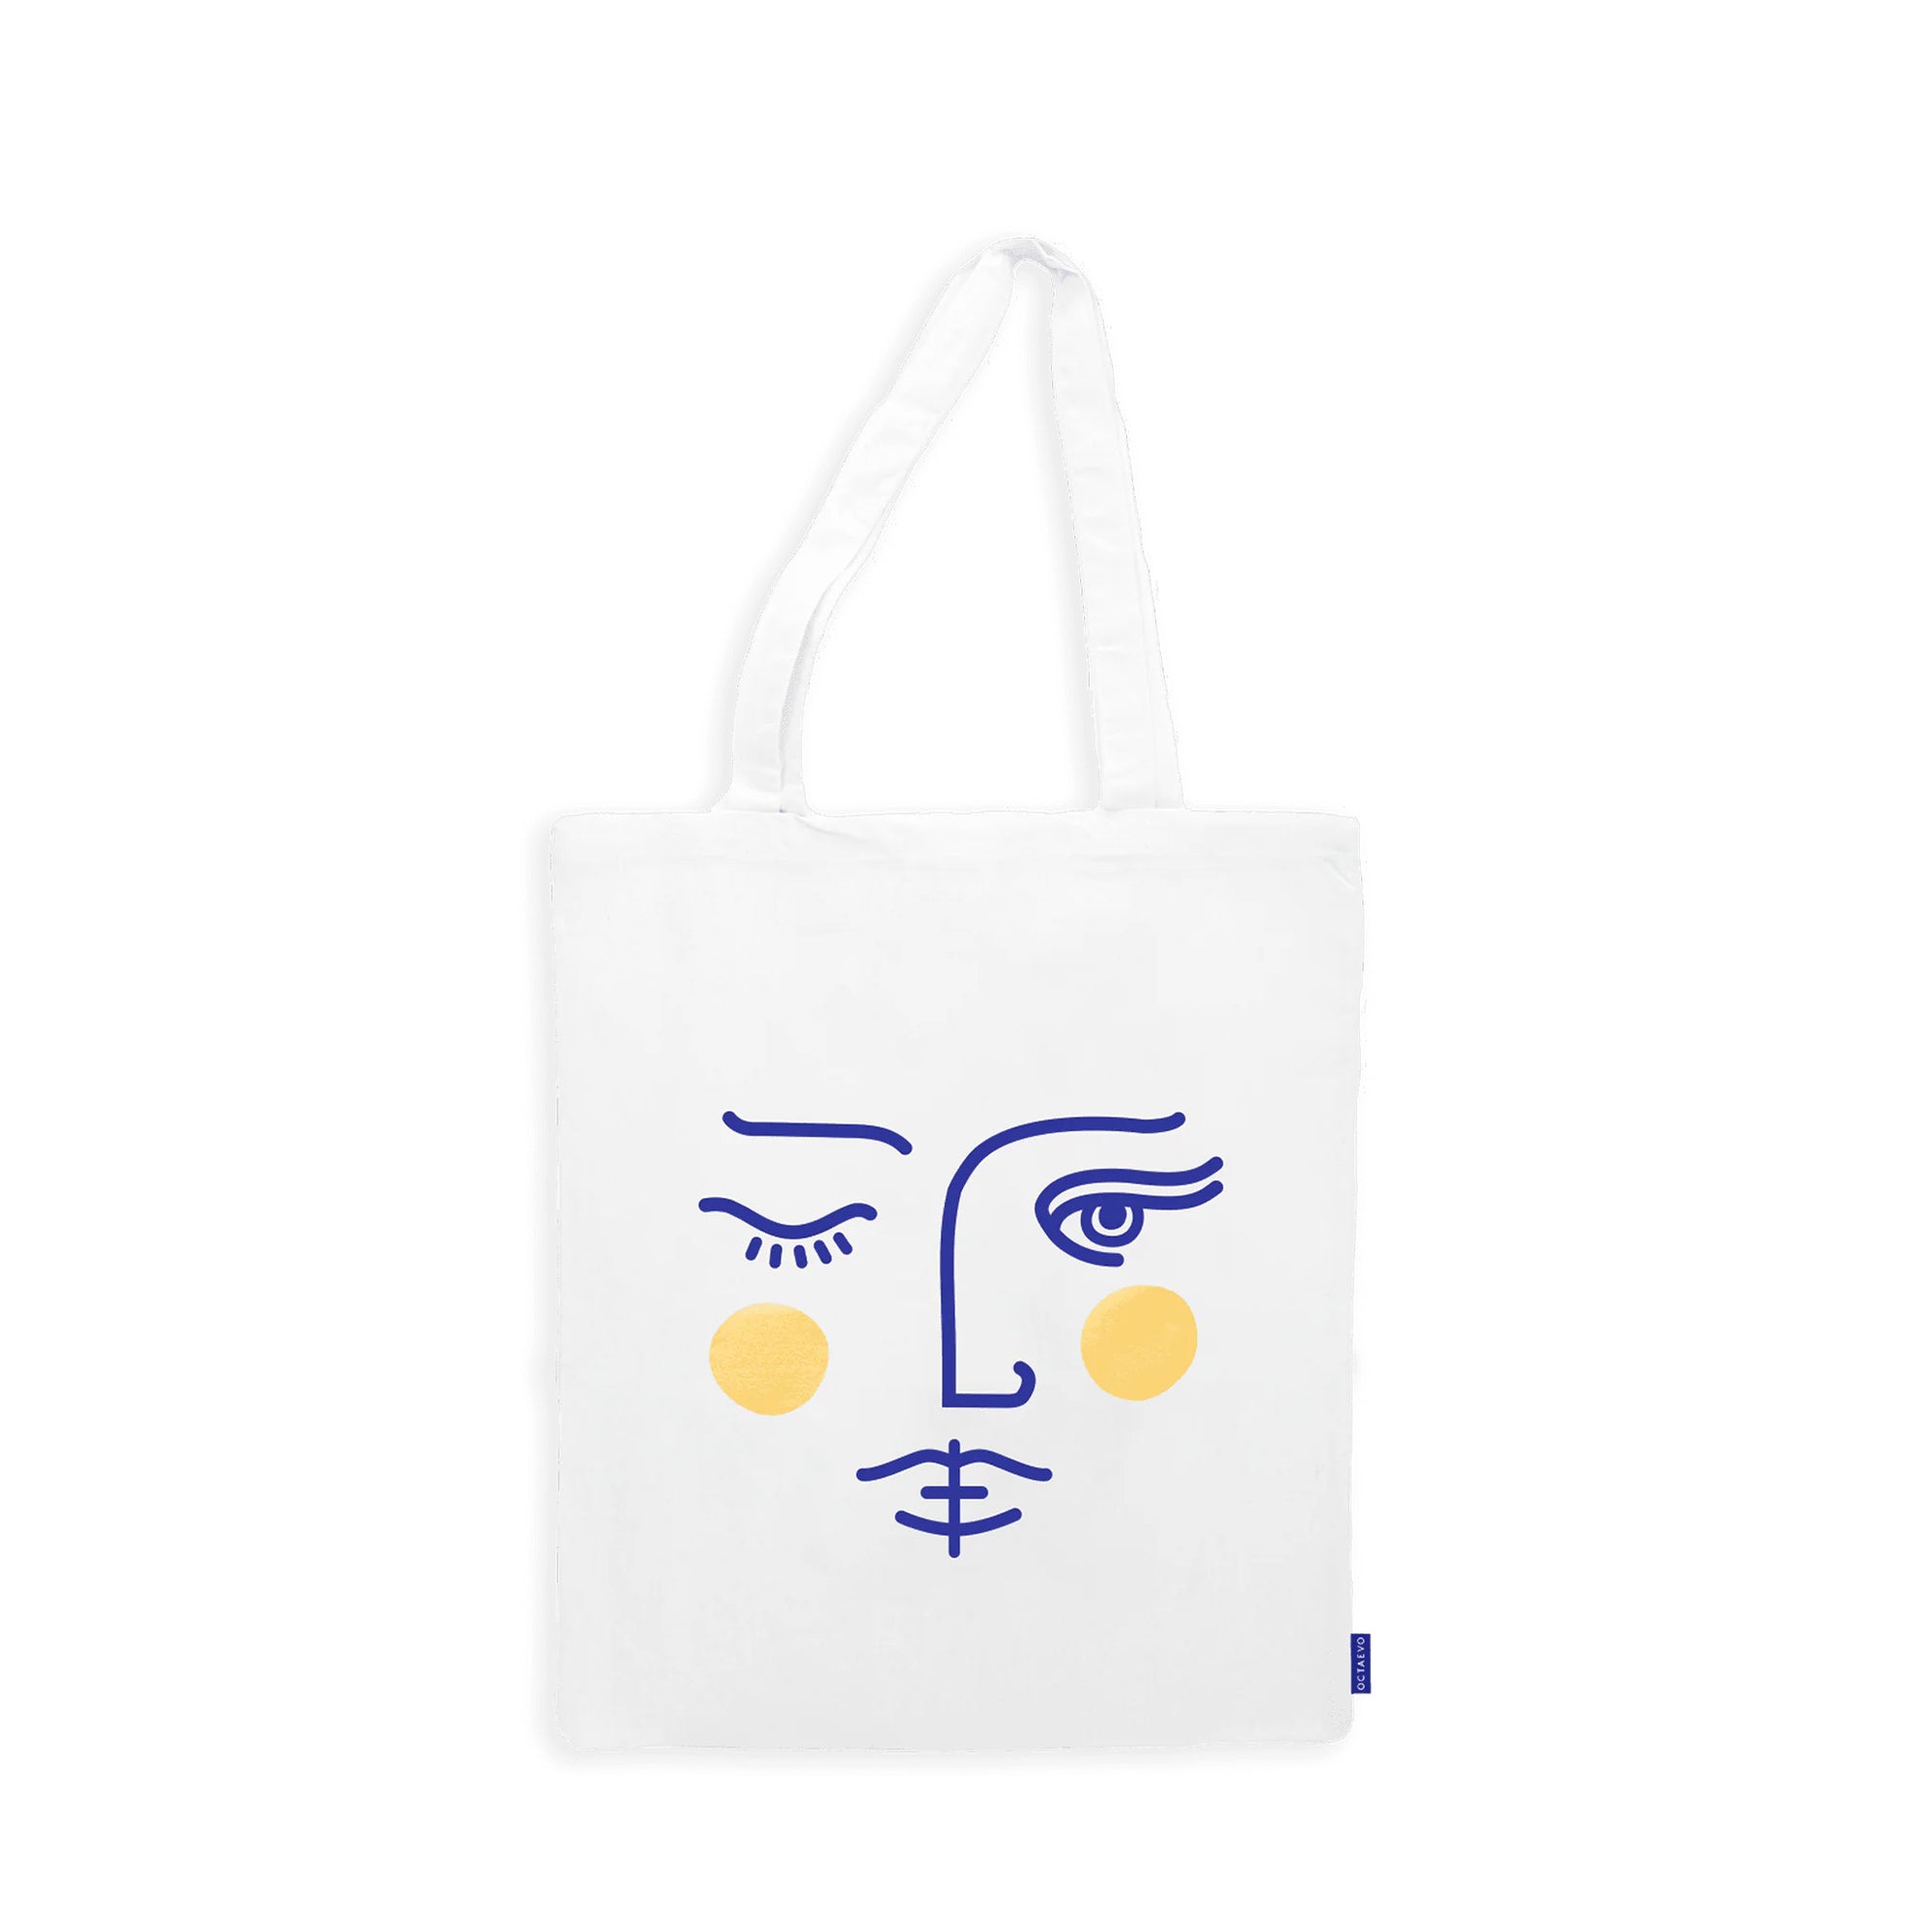 Janus Double-Sided Tote Bag White and Blue image 1